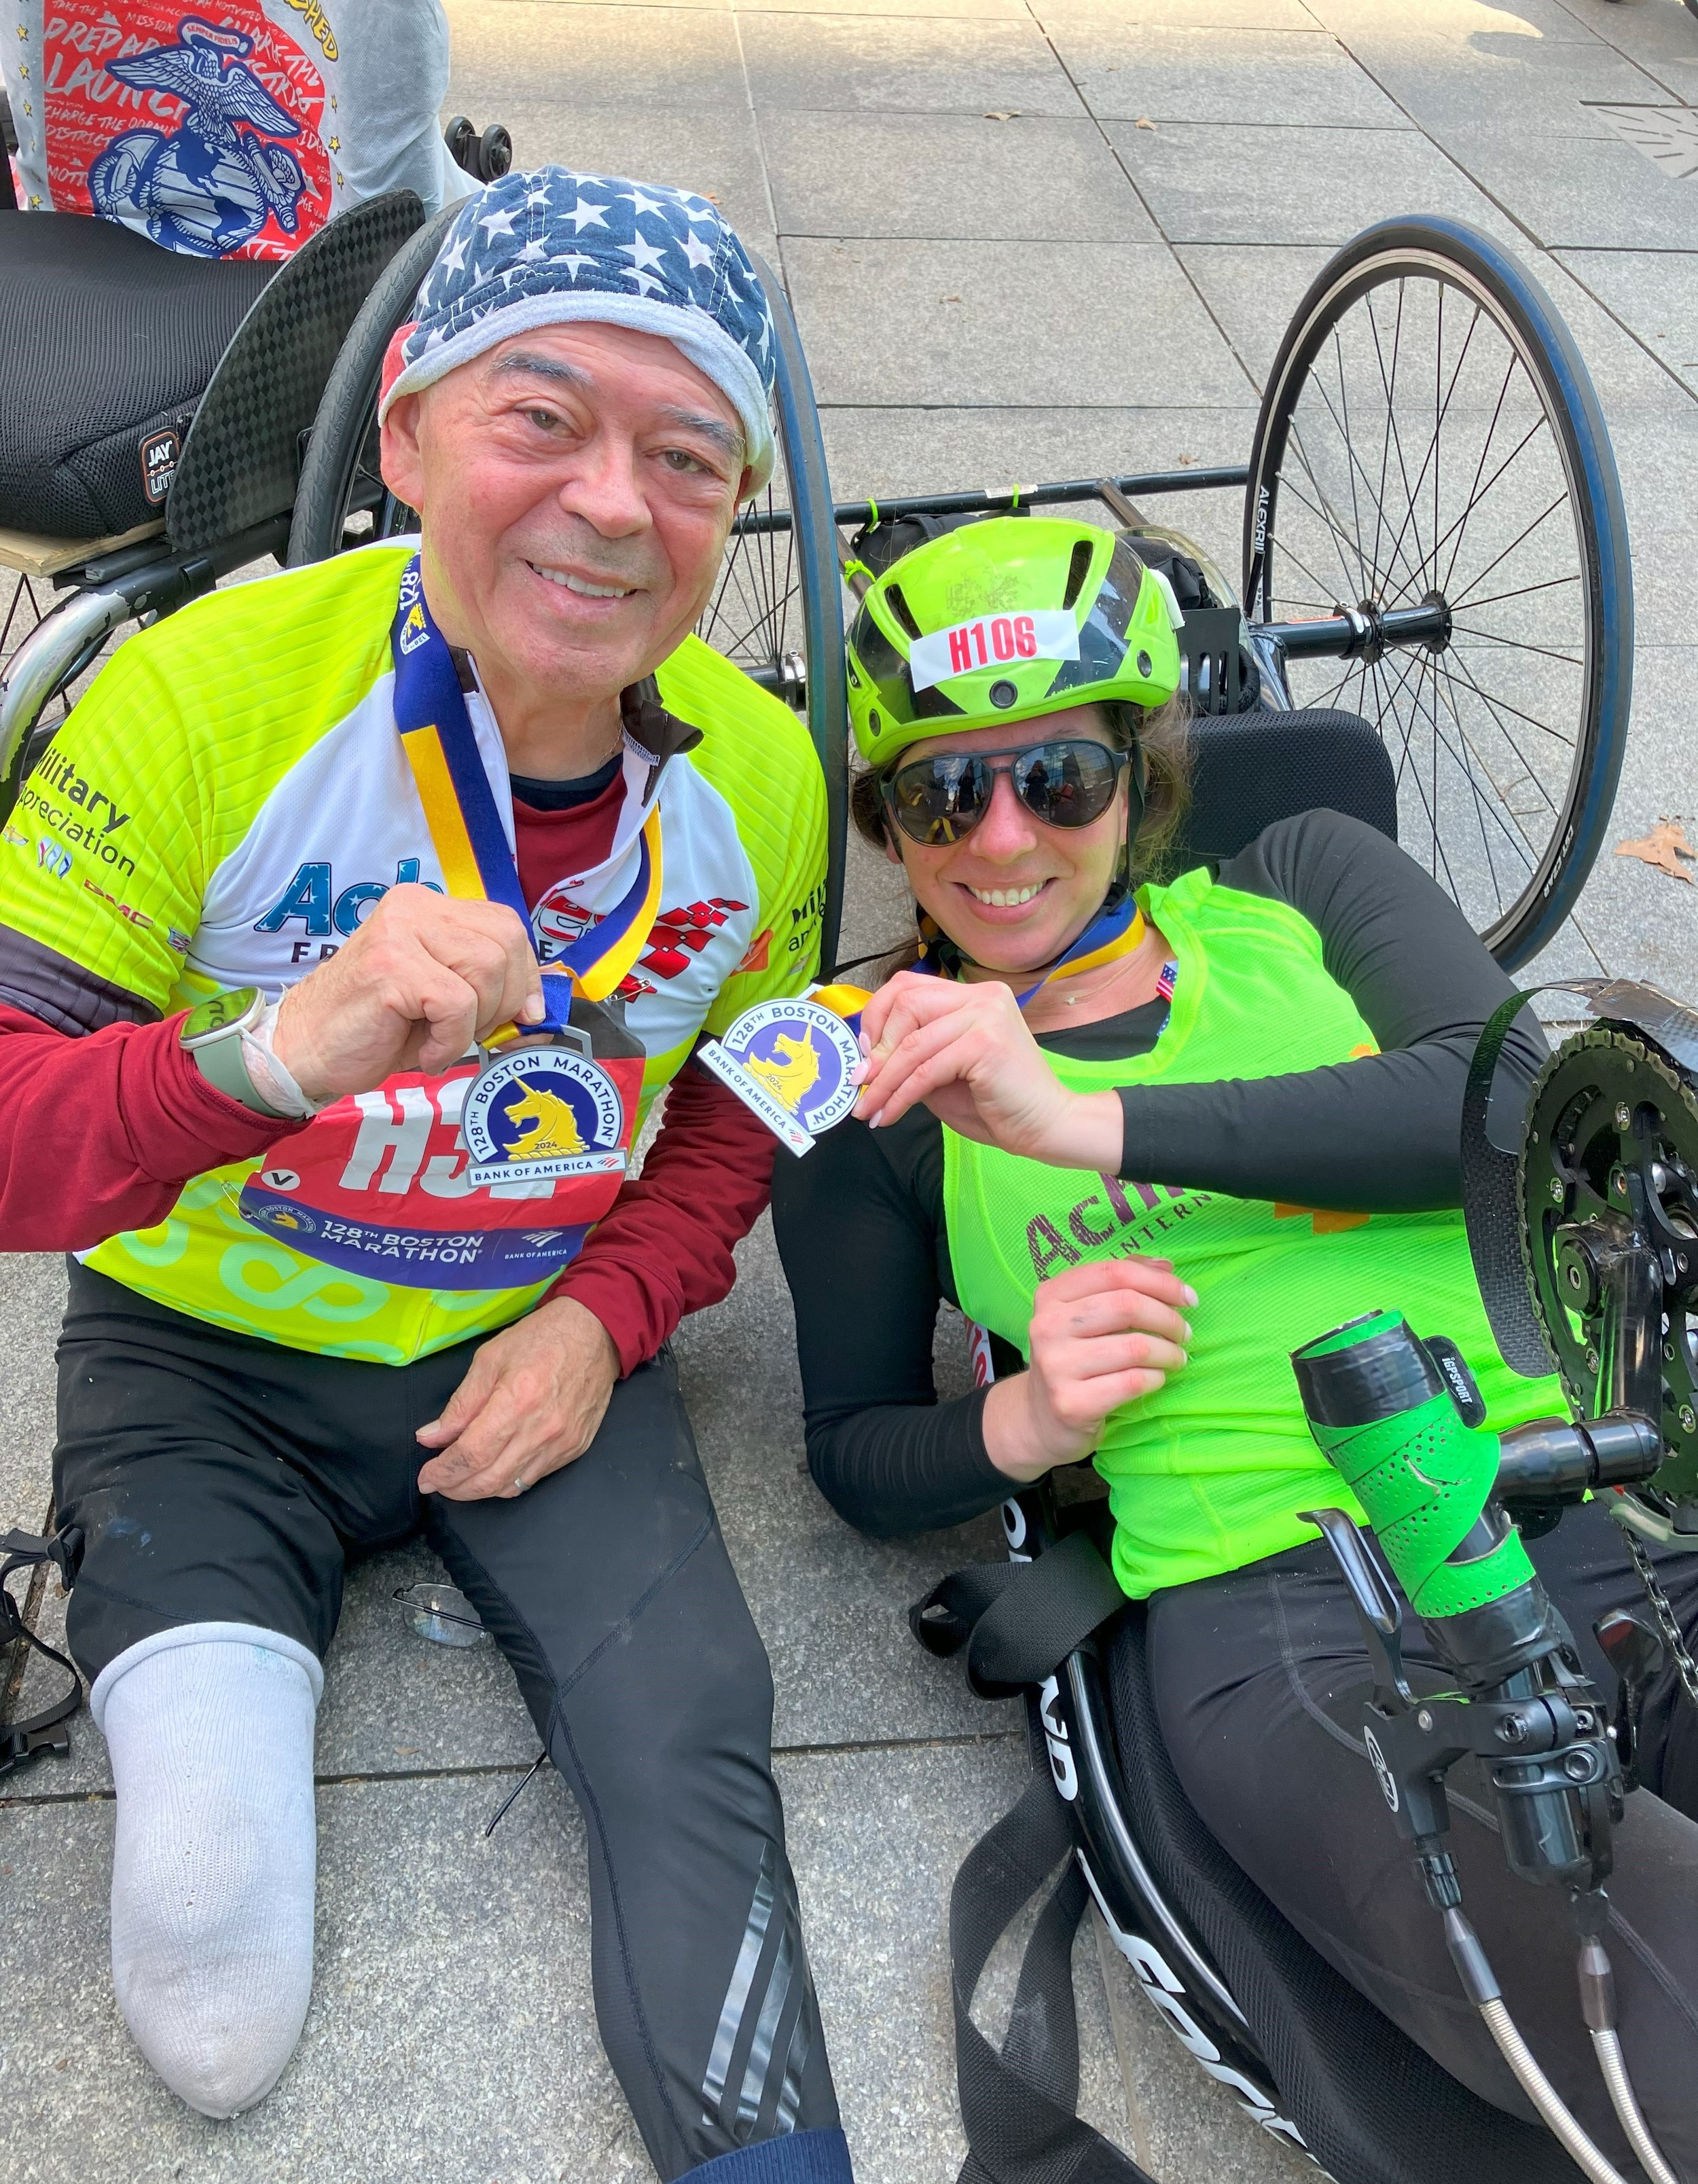  Achilles handcycle athletes smiling together with their medals 